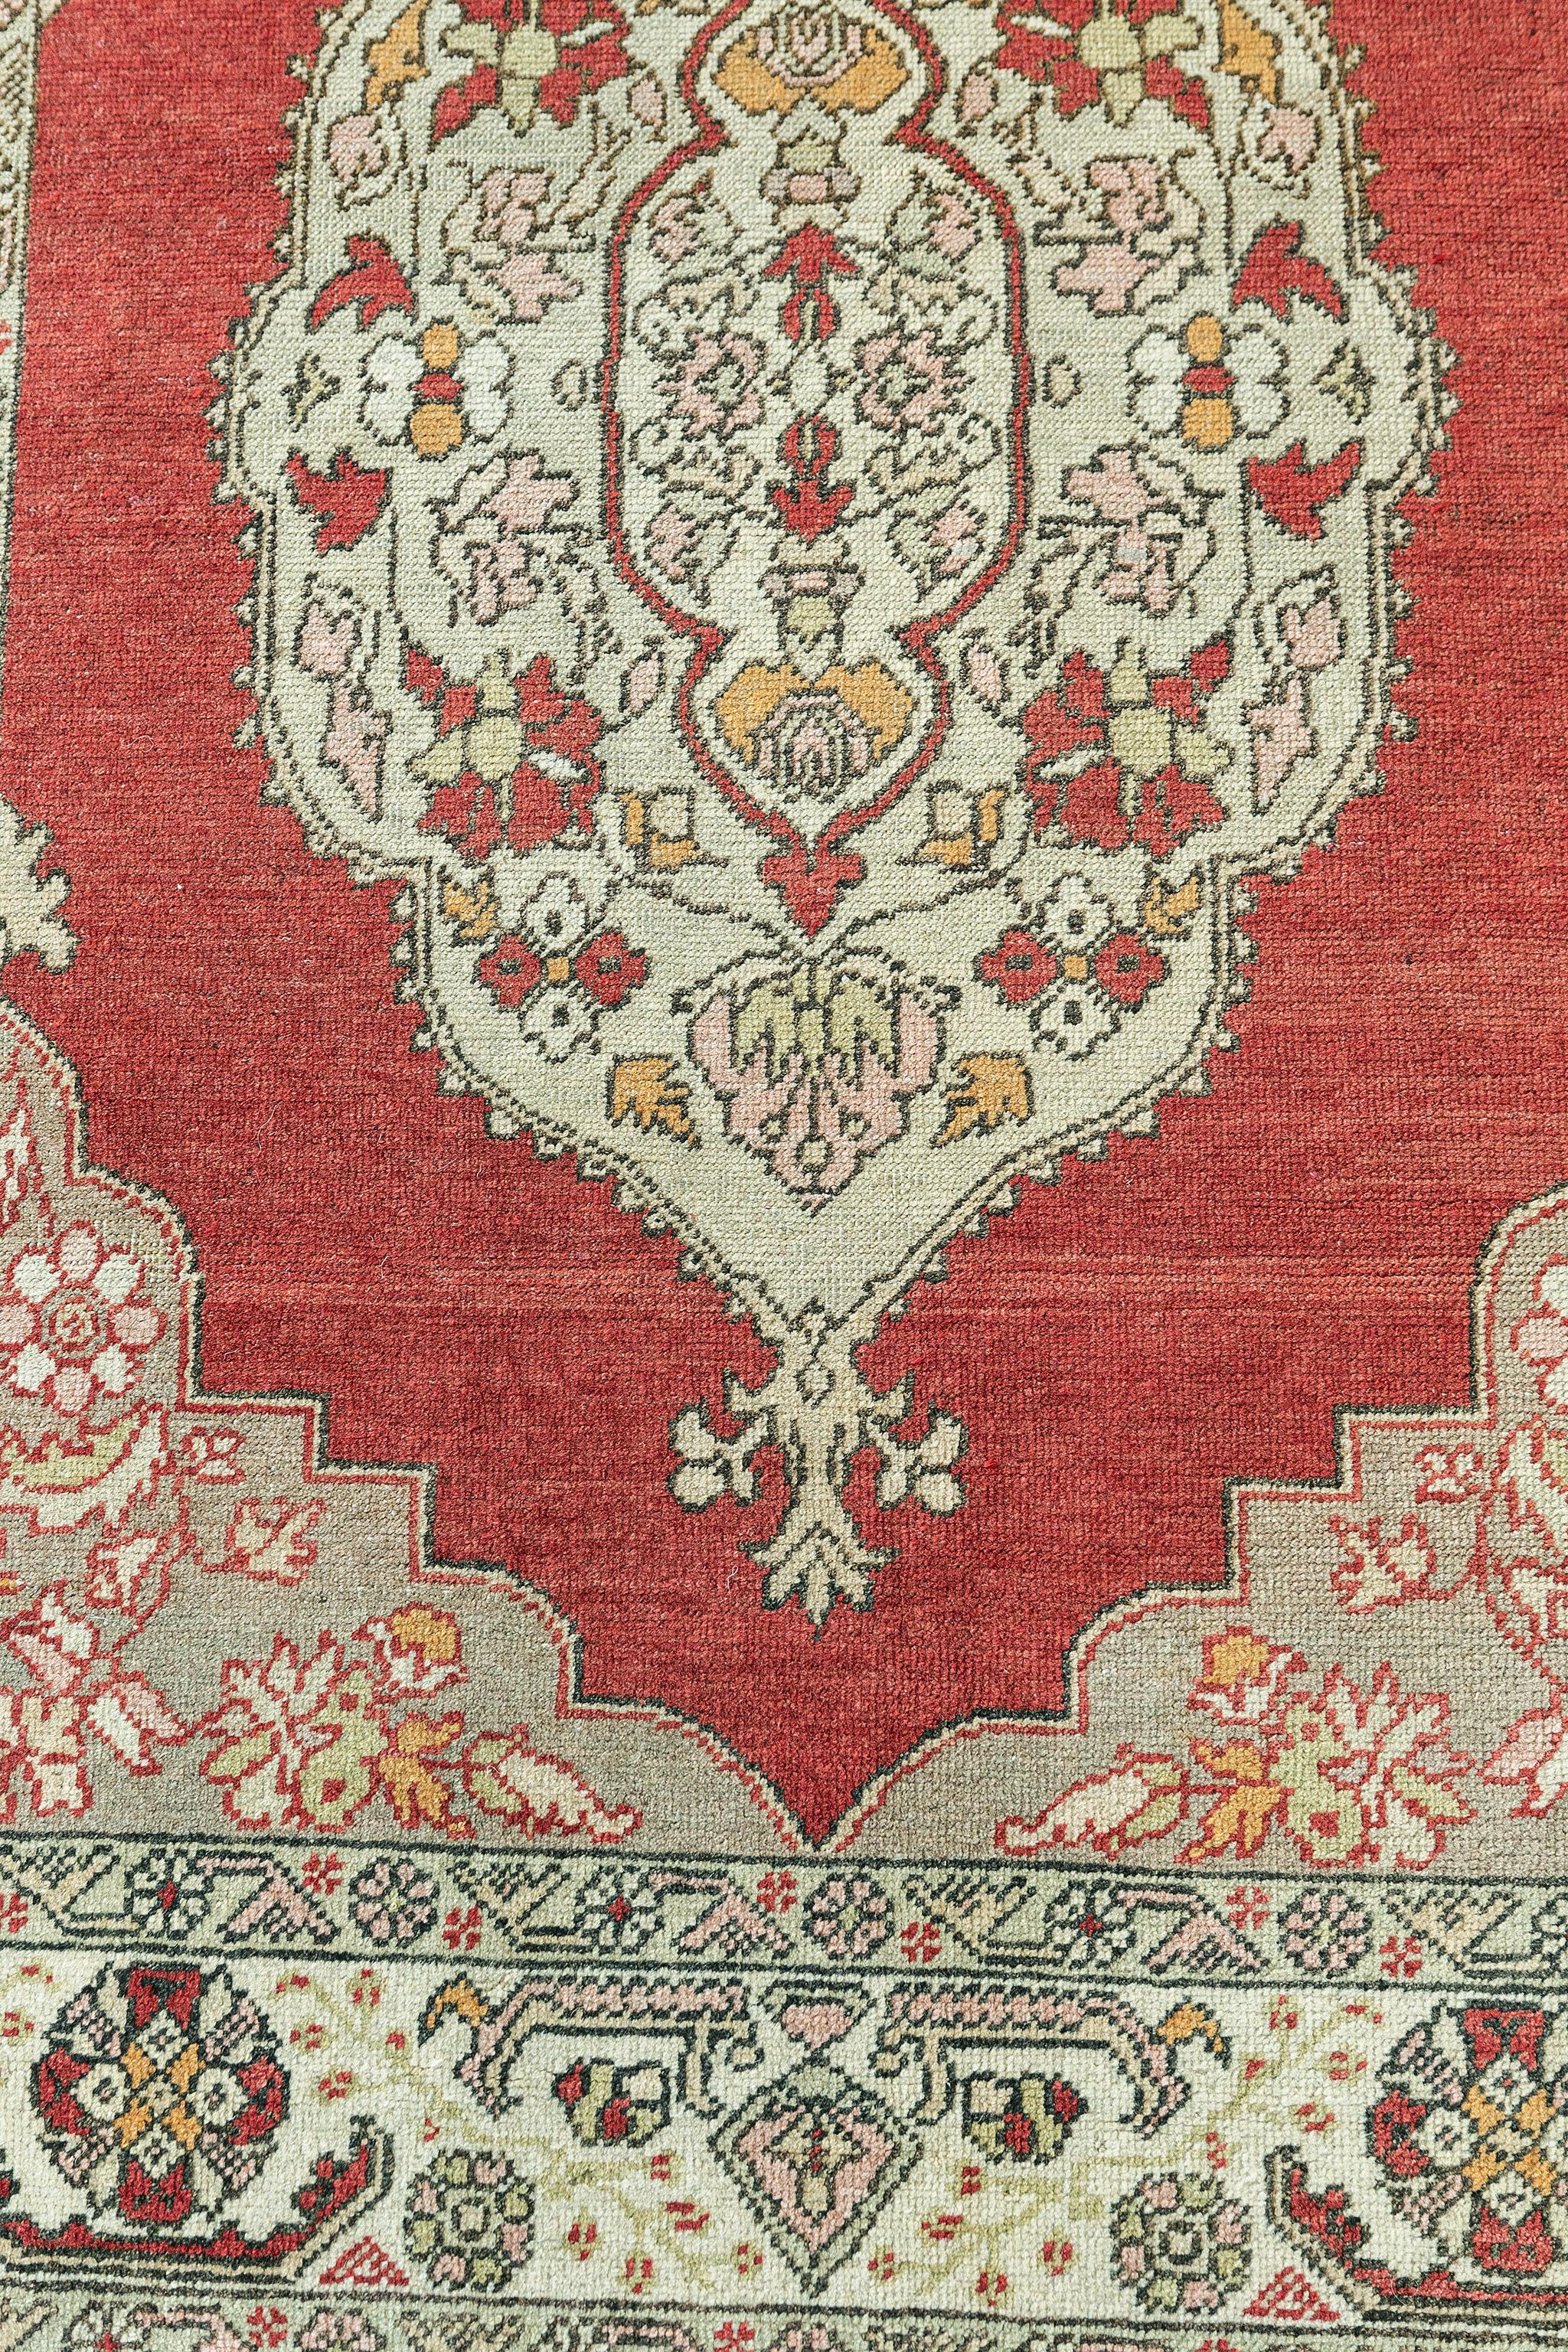 This Vintage Turkish Anatolian rug features a cusped central medallion flanked with stylized florals. The central medallion is surrounded by a botanical scene composed of rose, iris, blossoms and thin angular vines dancing rhythmically throughout